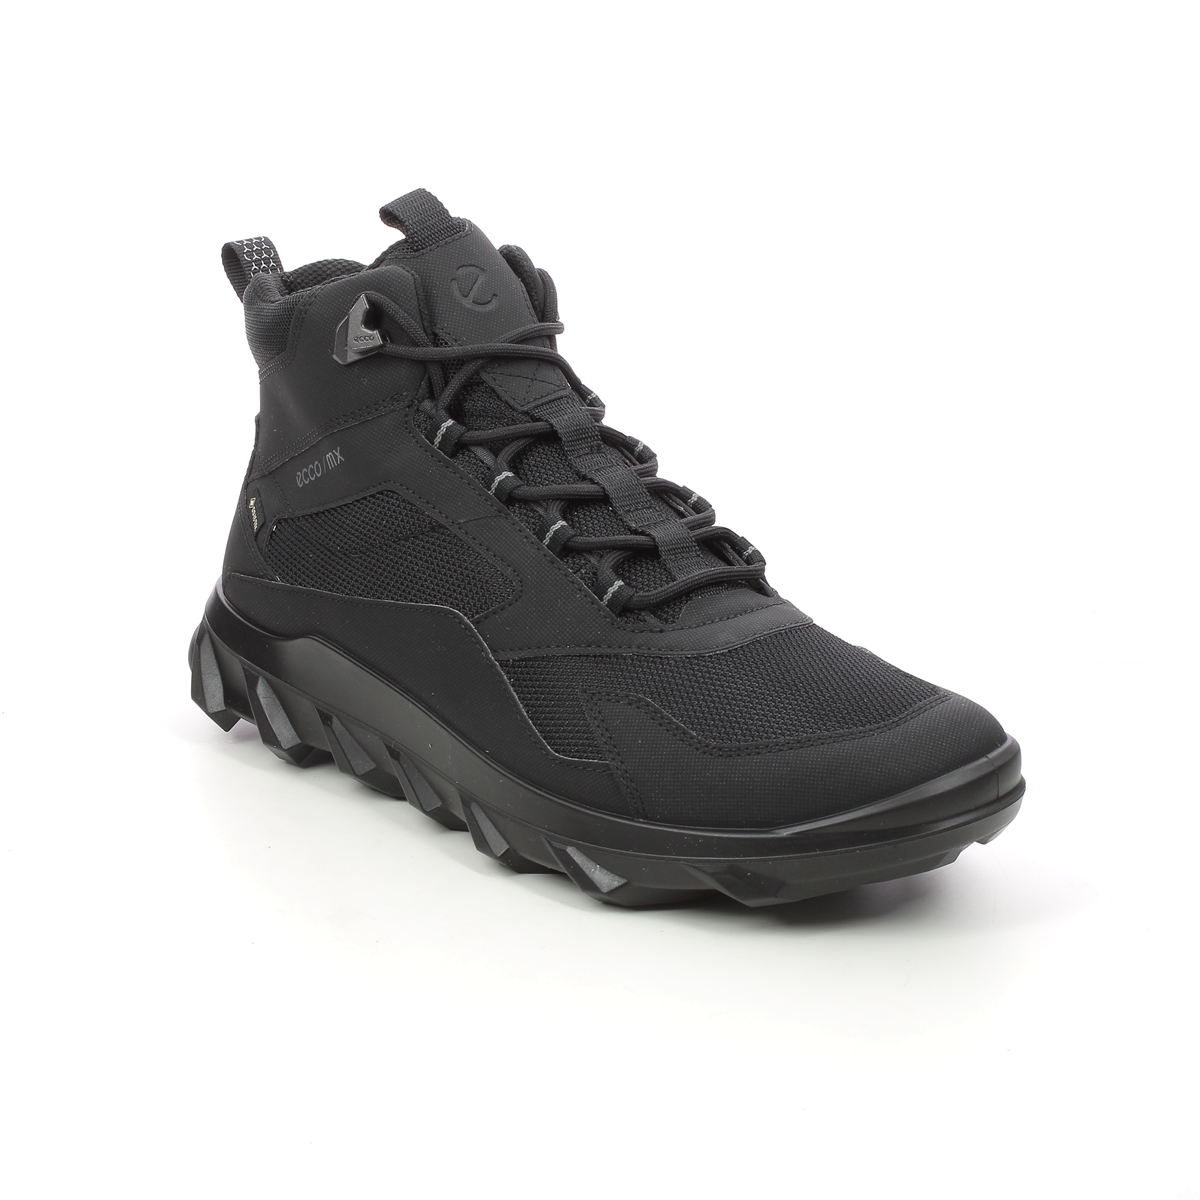 Ecco Mx Mid Mens Boot Gtx Black Mens Outdoor Walking Boots 820224-51052 In Size 46 In Plain Black